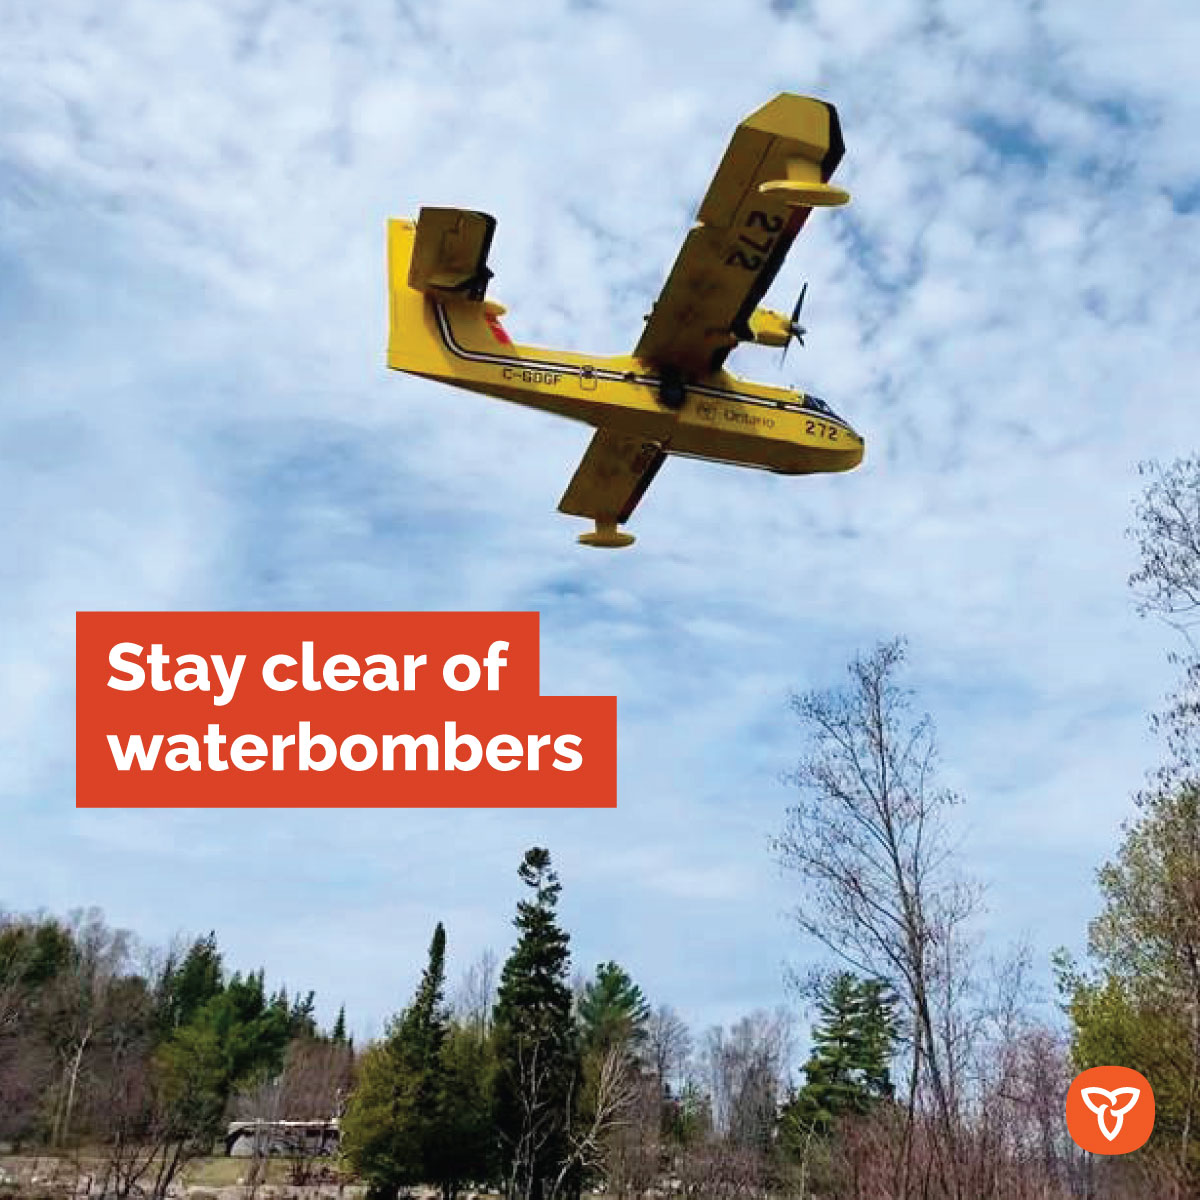 See a waterbomber in the sky? Get out of the way and onto the shore! Waterbombers need space to scoop water and assist in fighting fires. Obstructions delay their ability to do so, and puts safety at risk. 

Learn more: ontario.ca/page/drones-wa… @ONforestfires